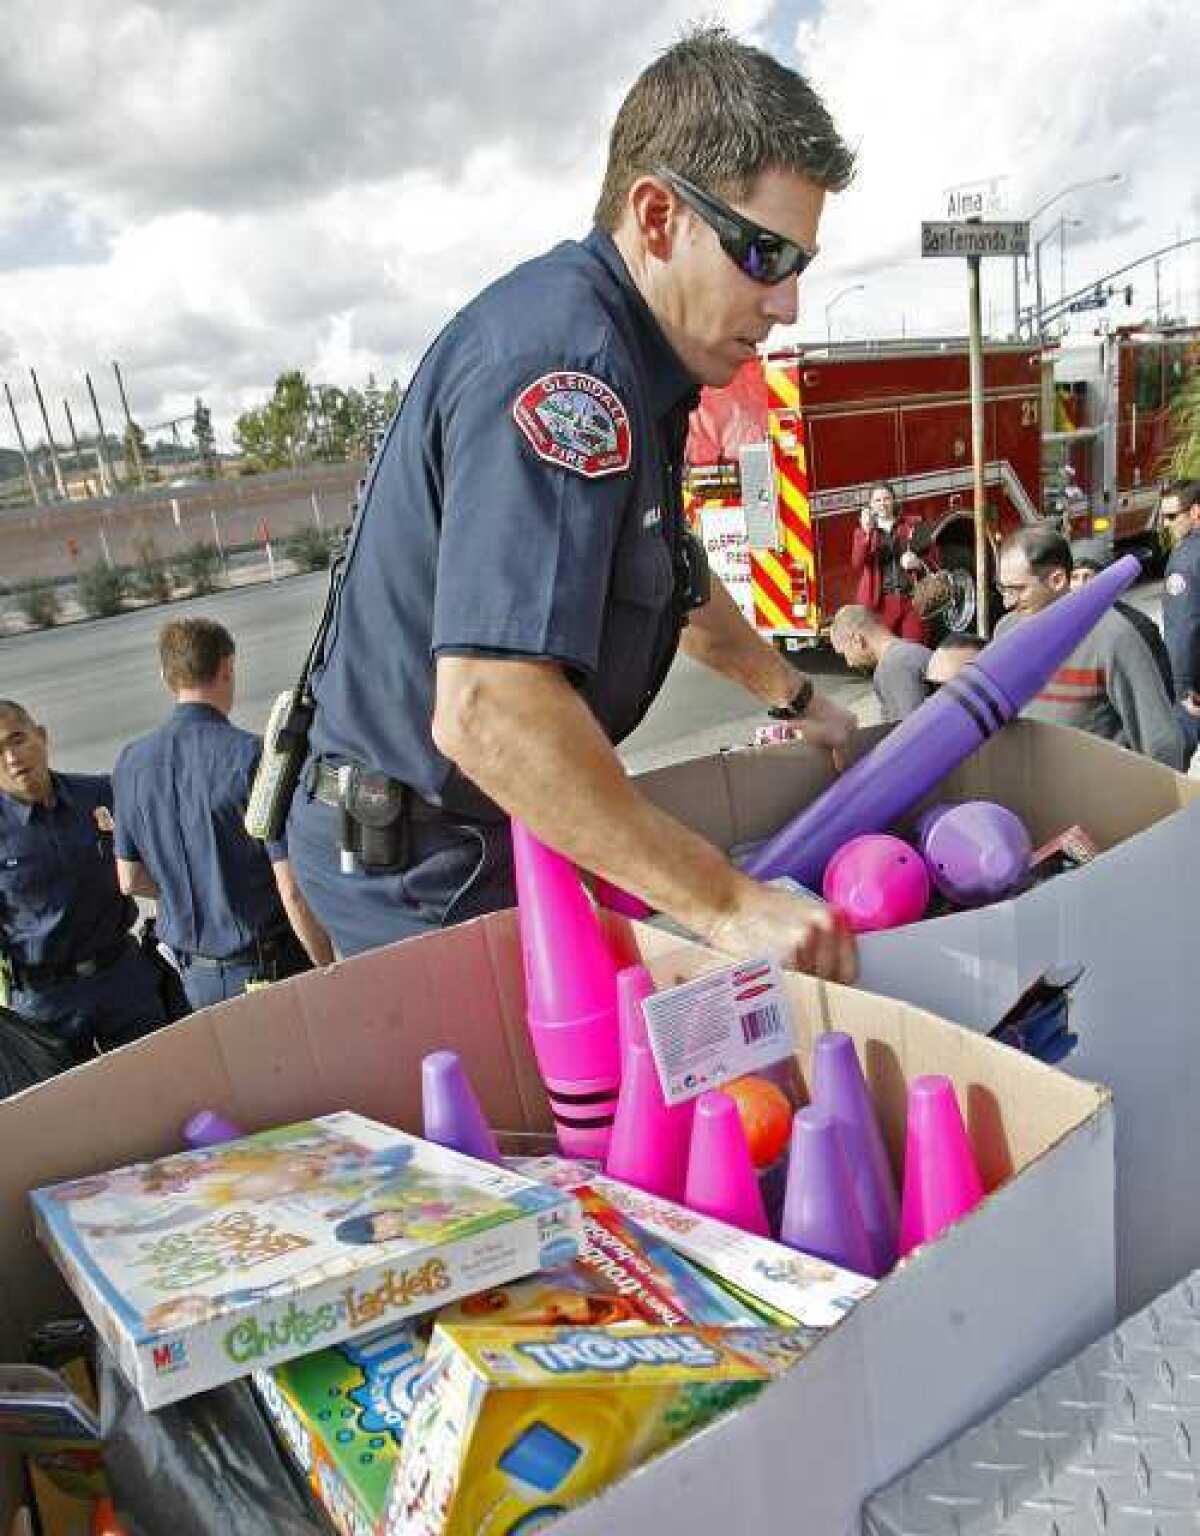 Glendale Fire paramedic Tom Nicola loads toys onto a fire department pickup in Glendale at 4 Over, Inc. Employees at 4Over, Inc. collected $5,000 in donations to purchase new toys to the 20th Annual ABC7 Spark of Love toy drive with the Glendale Fire Department.